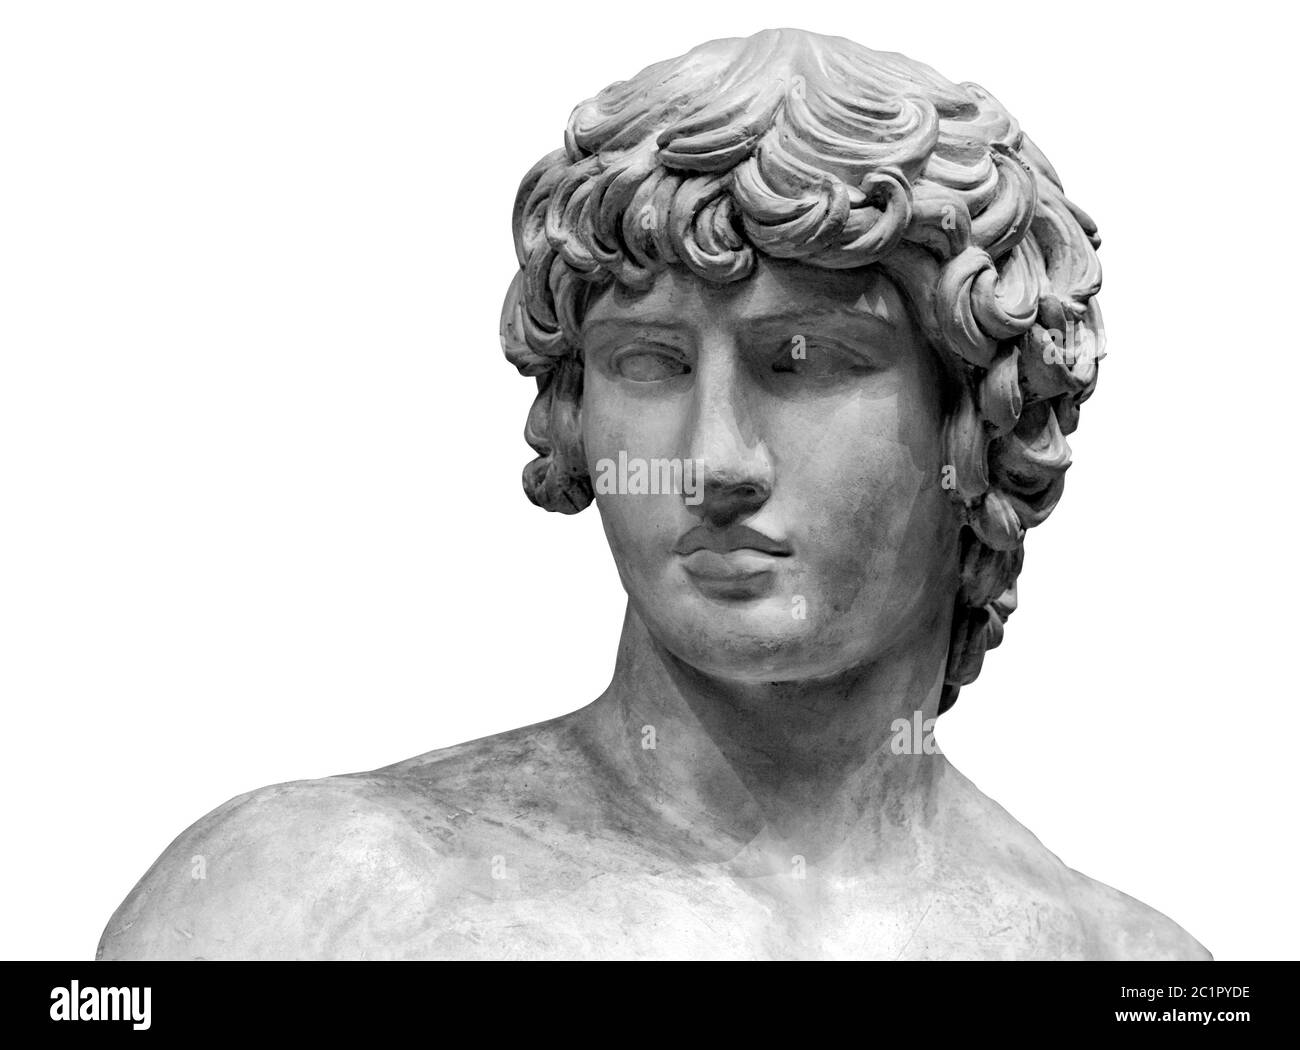 Head and shoulders detail of the ancient sculpture. Isolated on white background Stock Photo